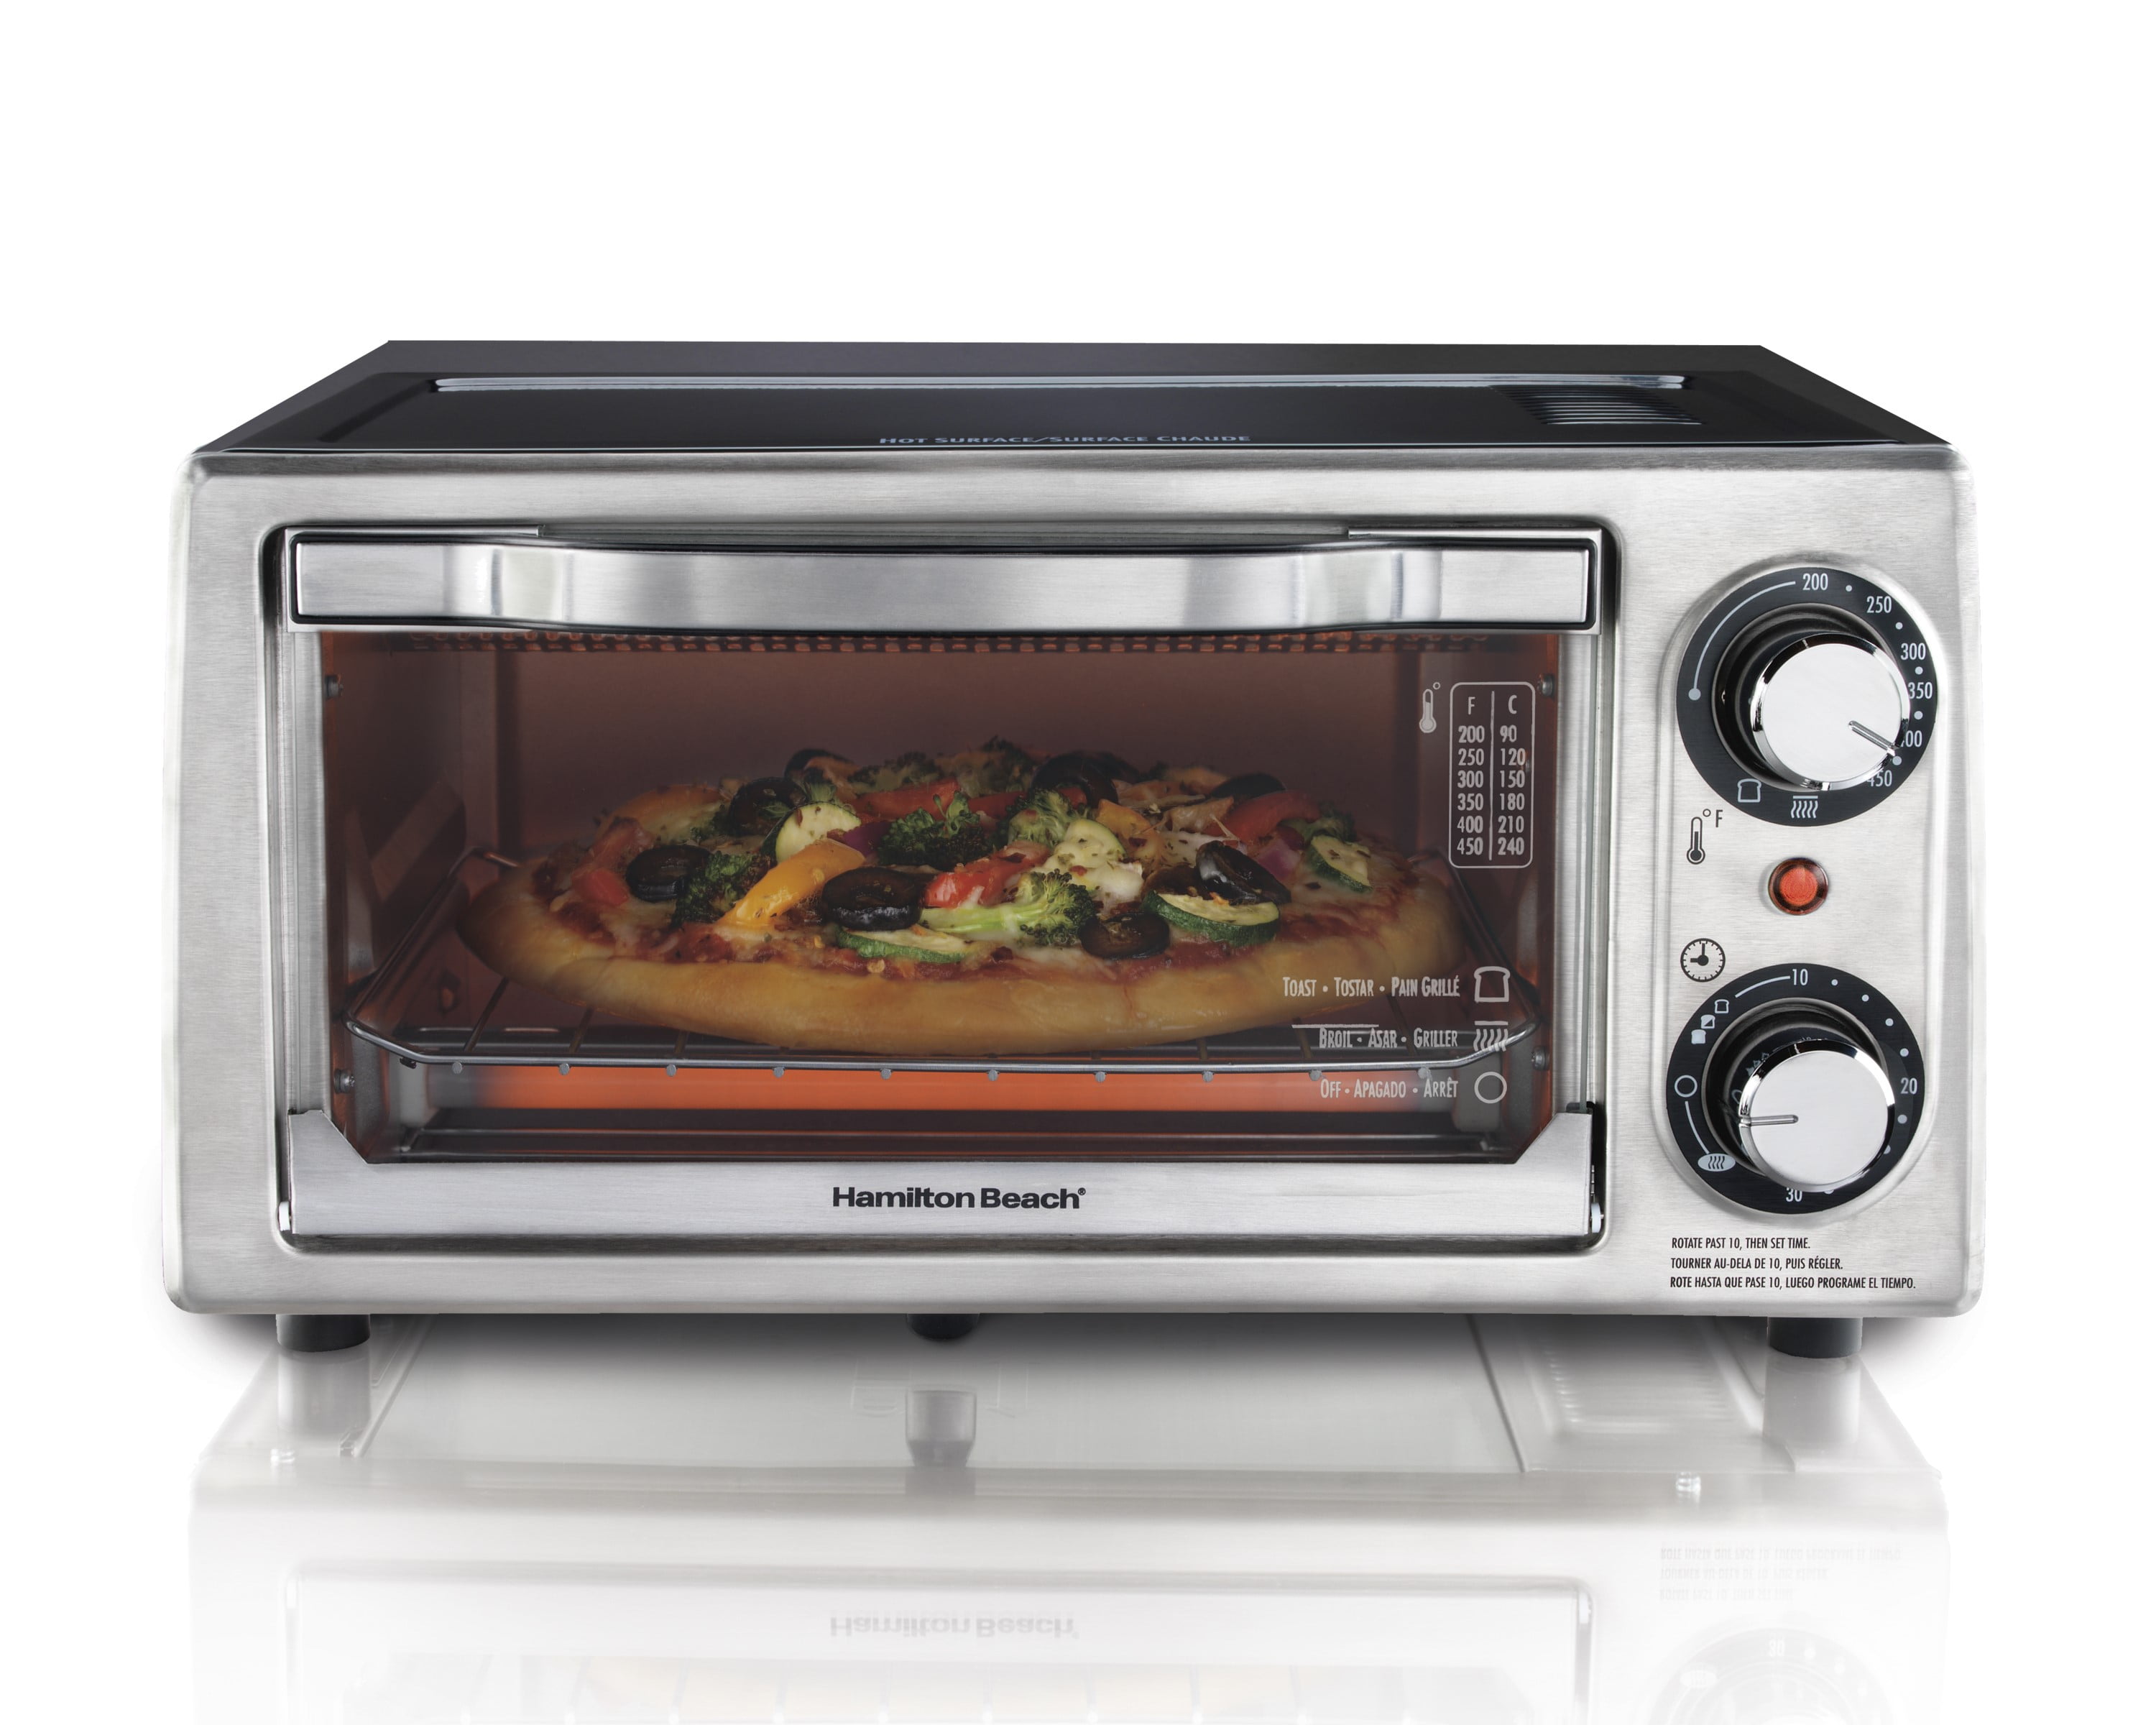 Hamilton Beach Toaster Oven In Charcoal, Model 2023 - AliExpress